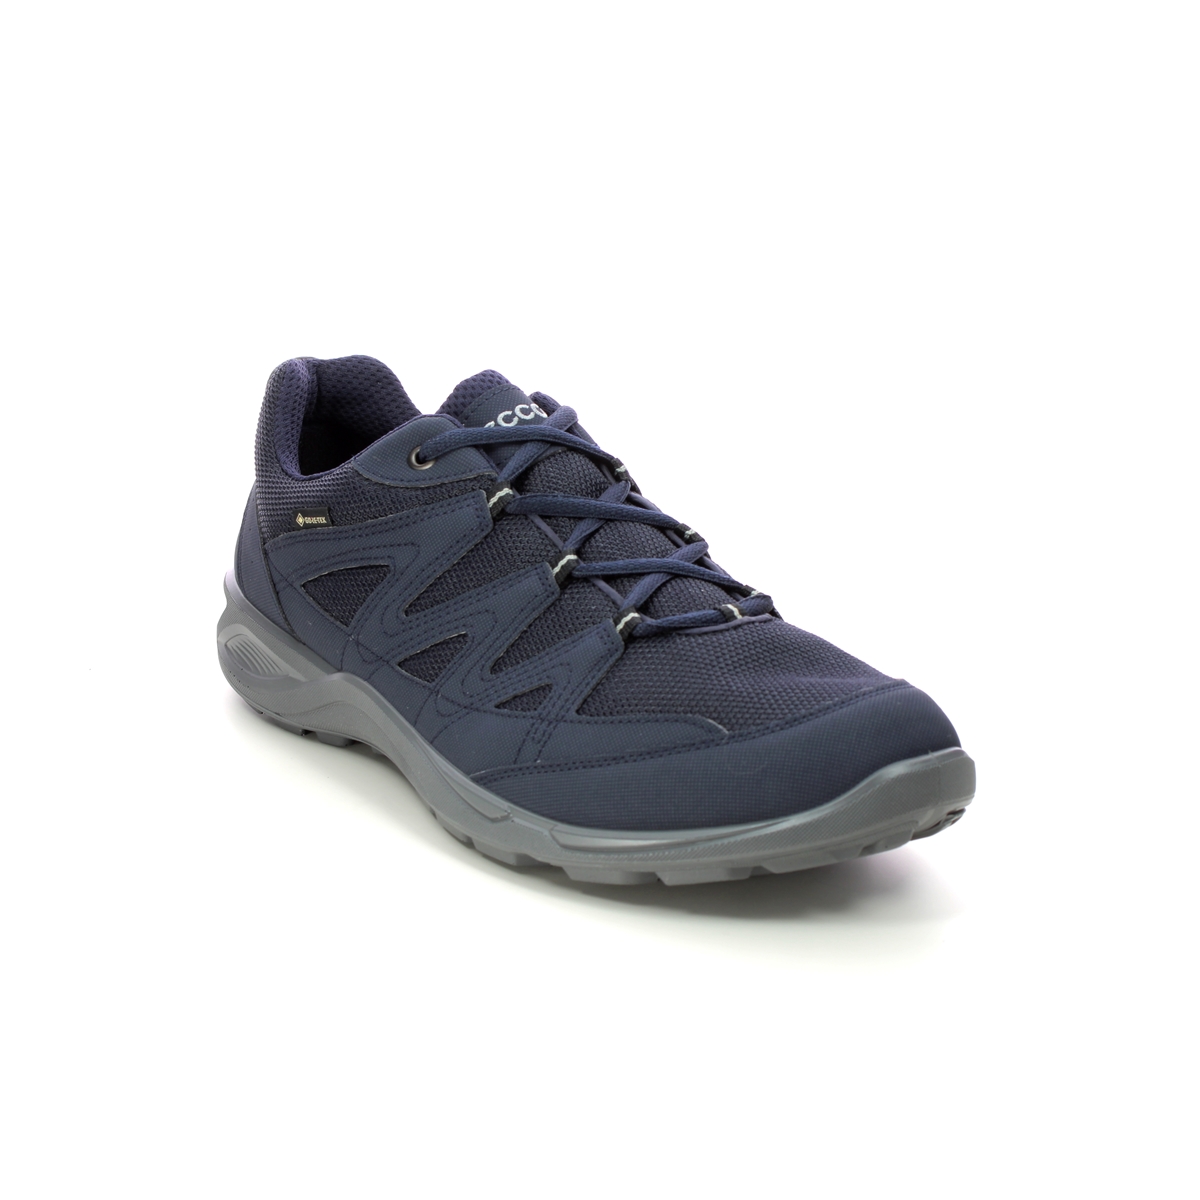 Ecco Terracruise Light Gtx Mens Navy Mens Trainers 825784-50769 In Size 46 In Plain Navy